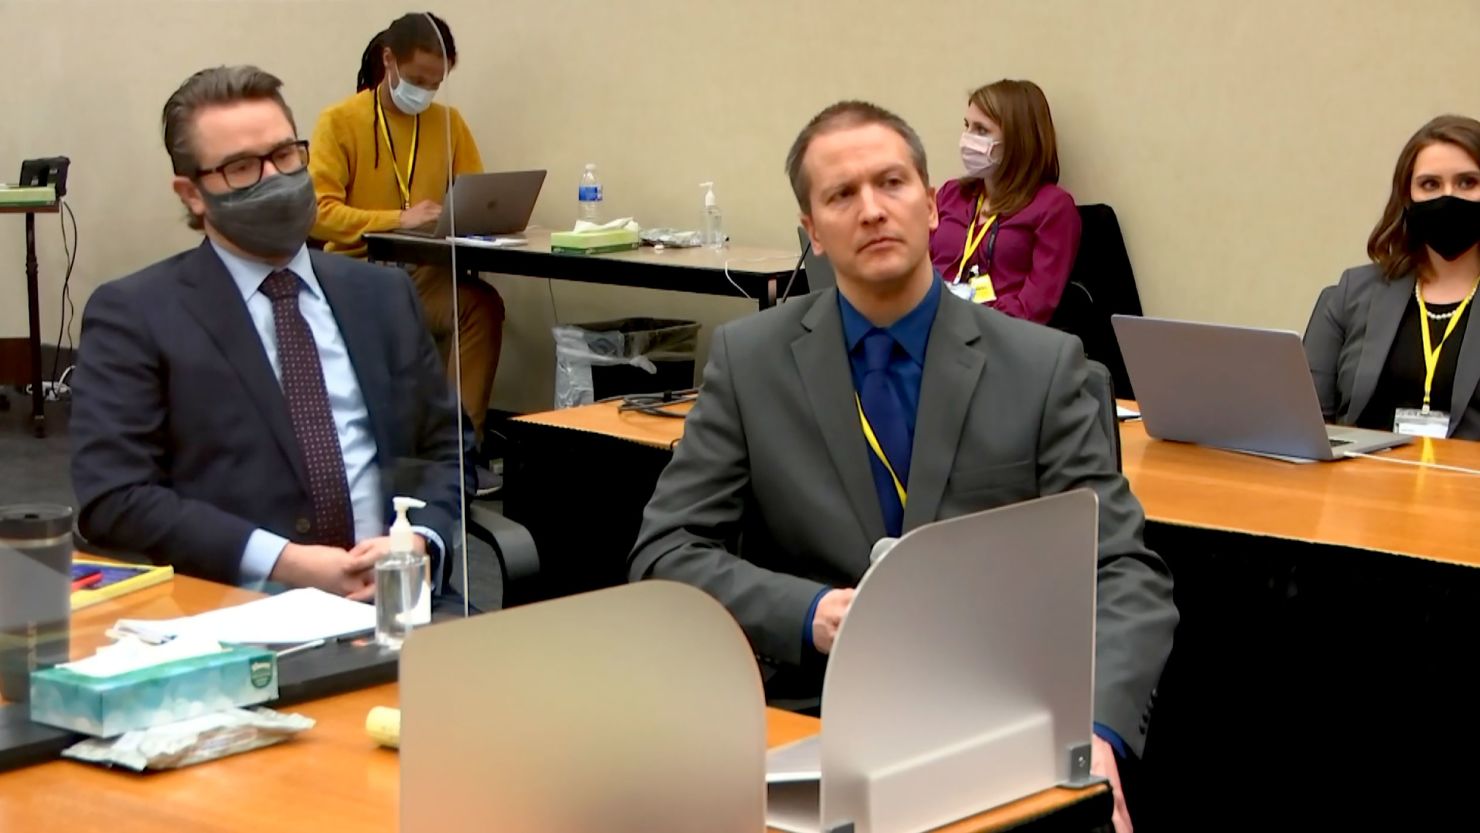 Former Minneapolis Police officer Derek Chauvin chose not to testify at his trial on April 15. Sitting to his left is defense attorney Eric Nelson.